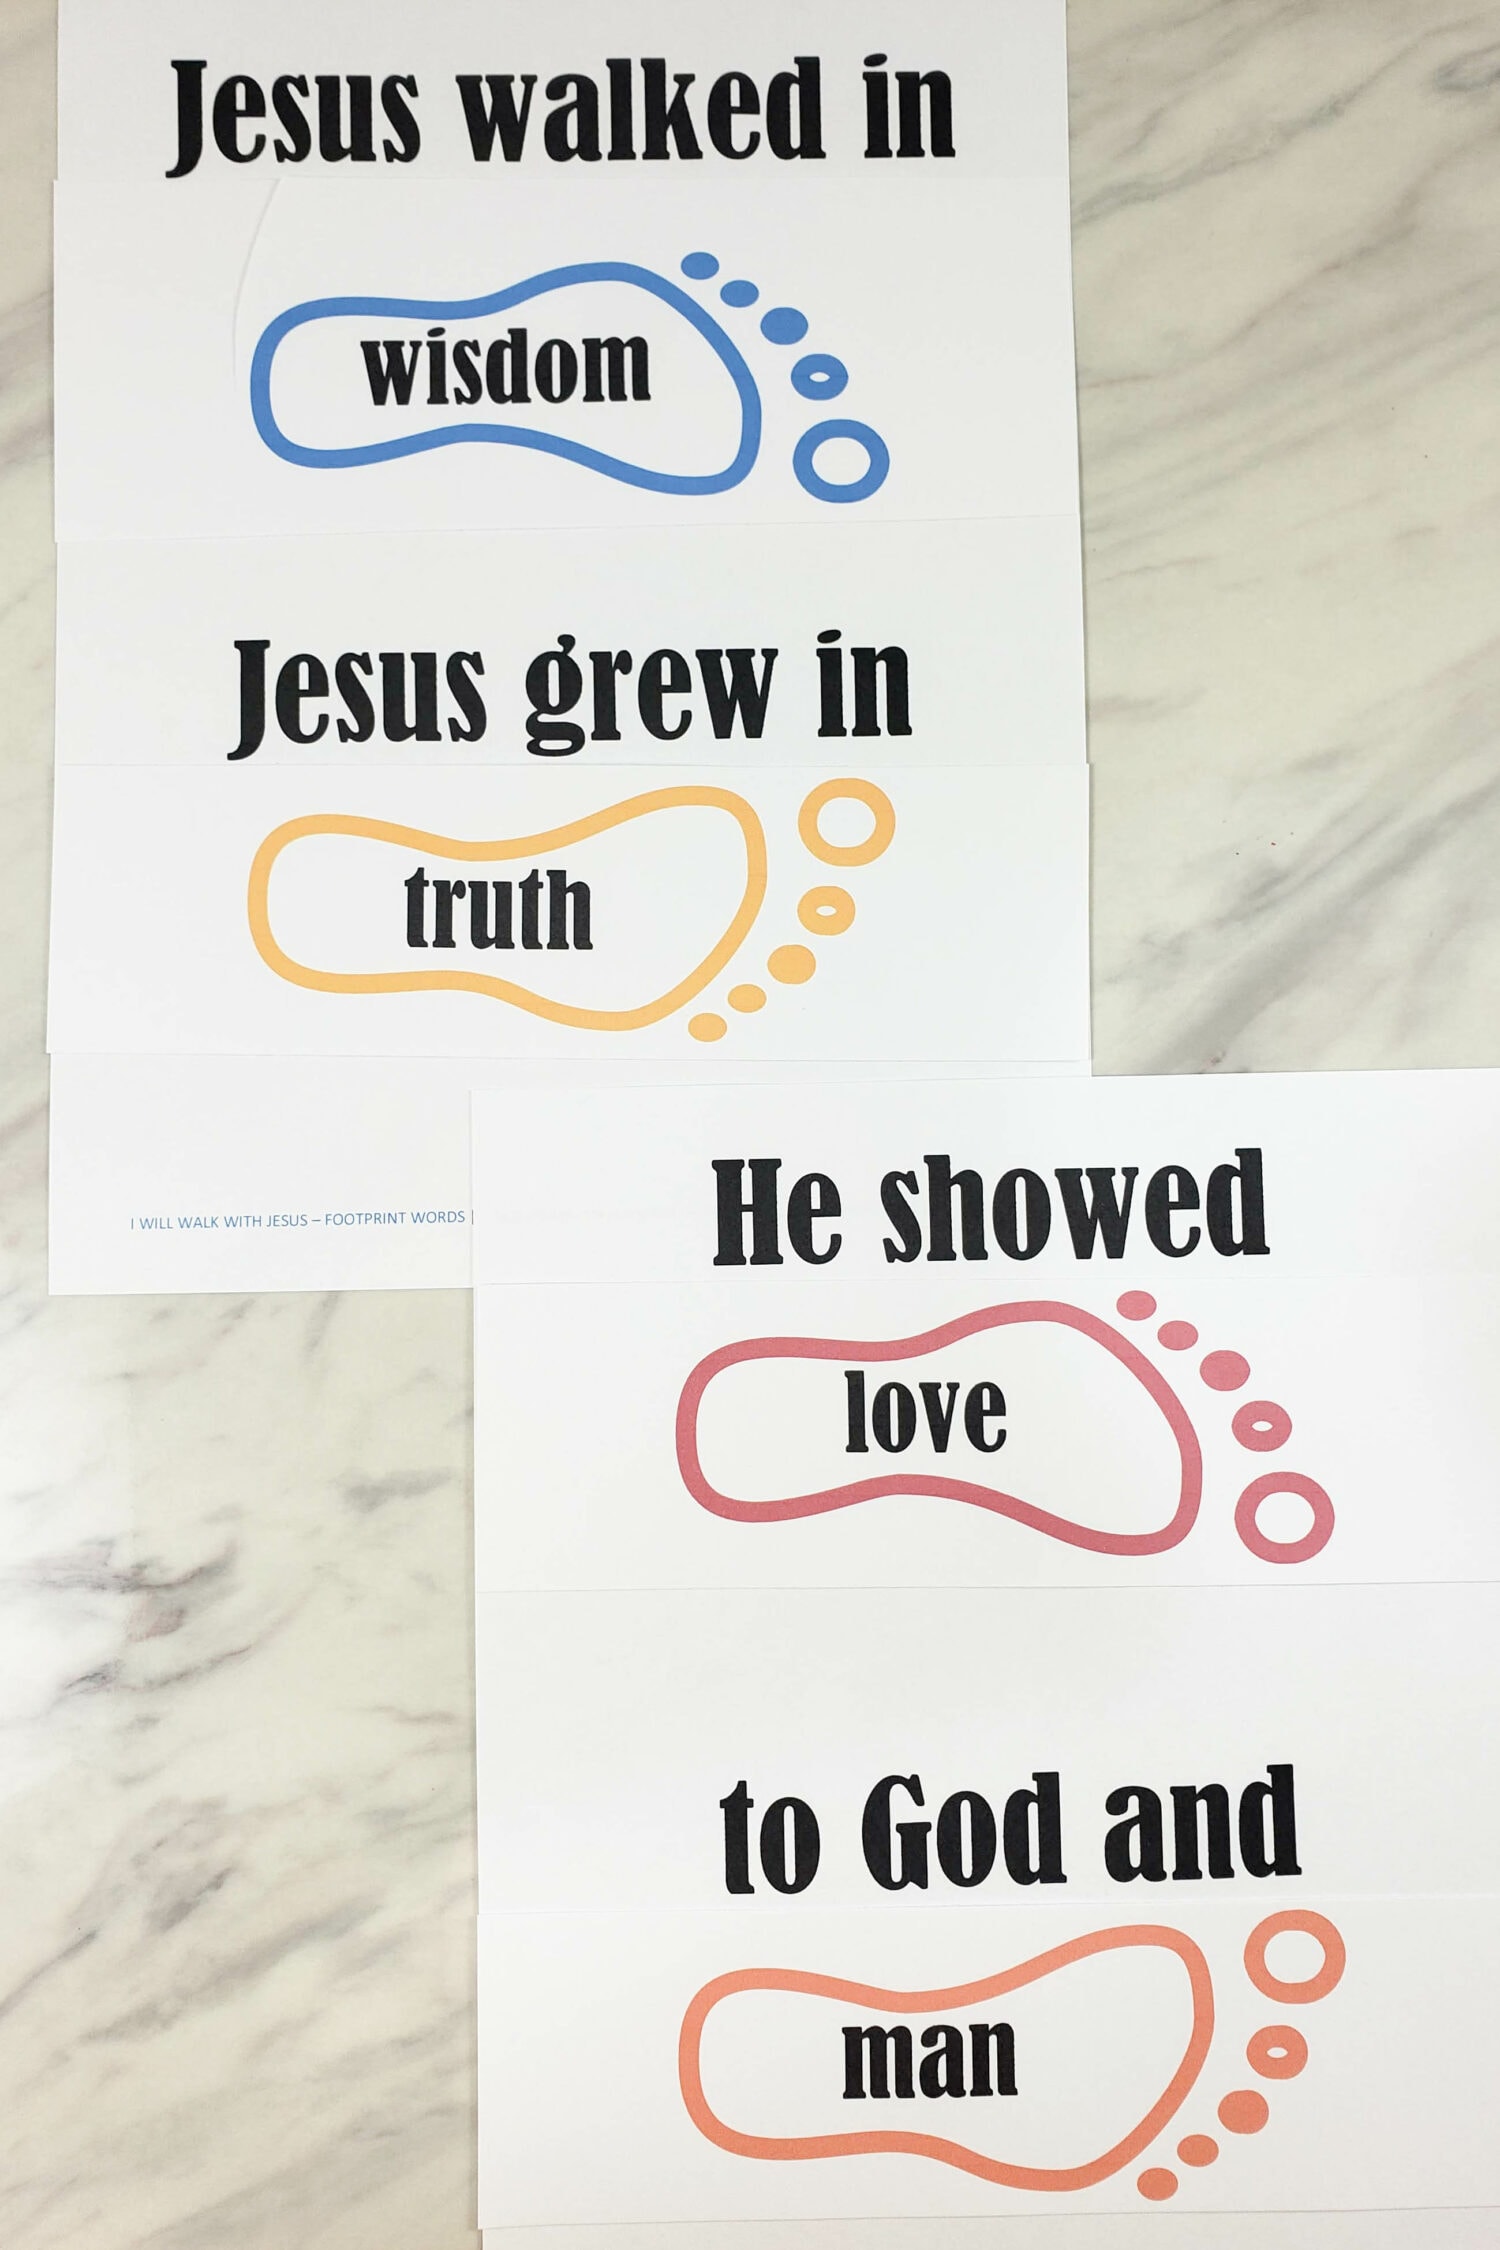 I Will Walk with Jesus footprint words singing time ideas